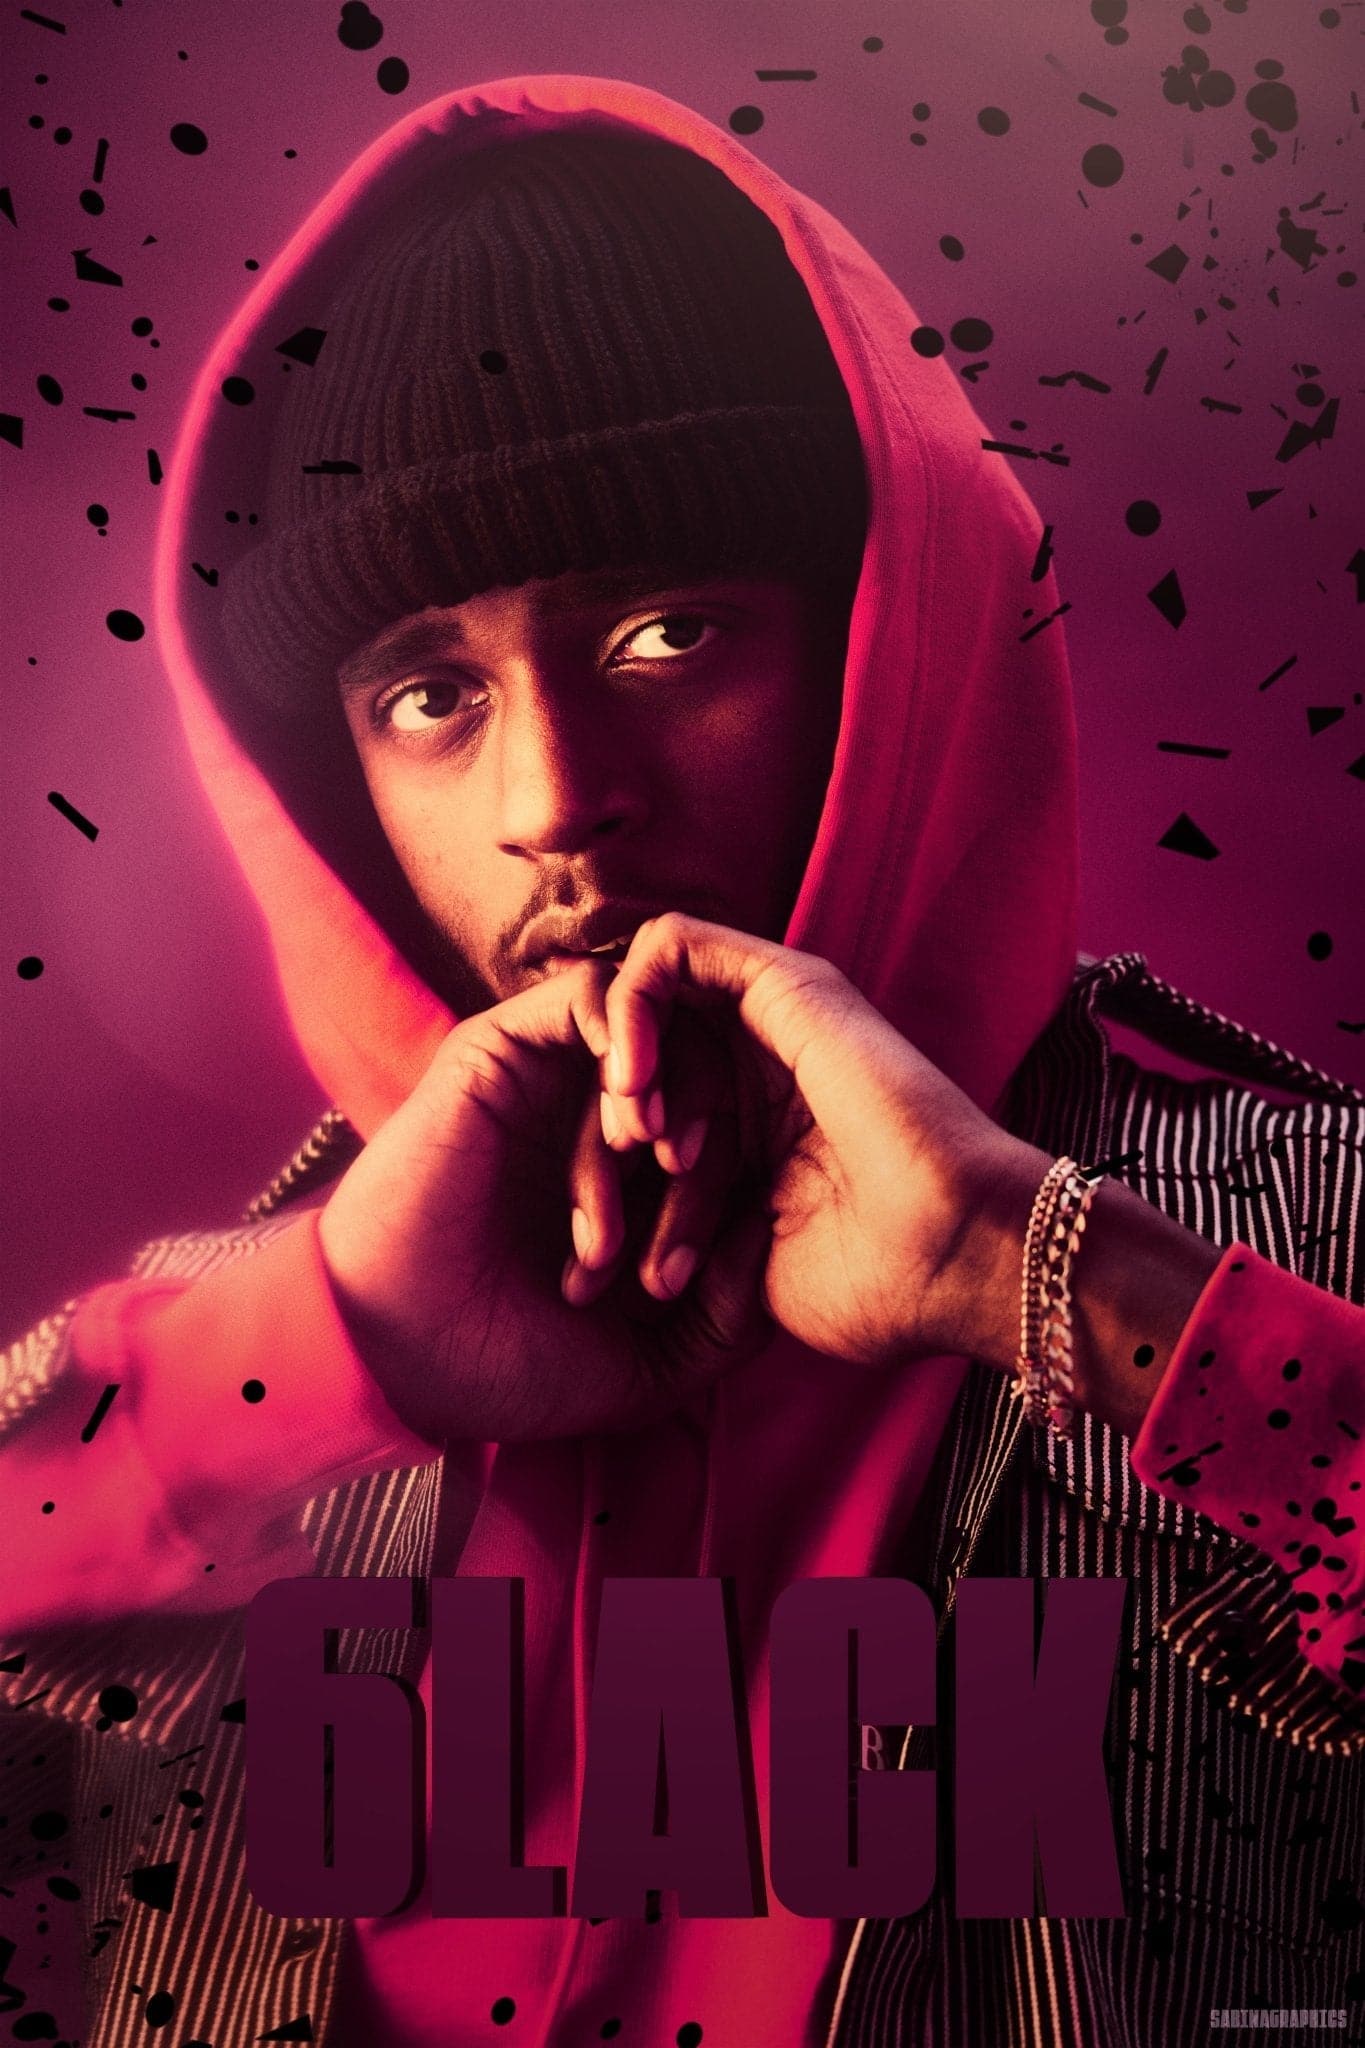 6lack 'All Love' Poster - Posters Plug